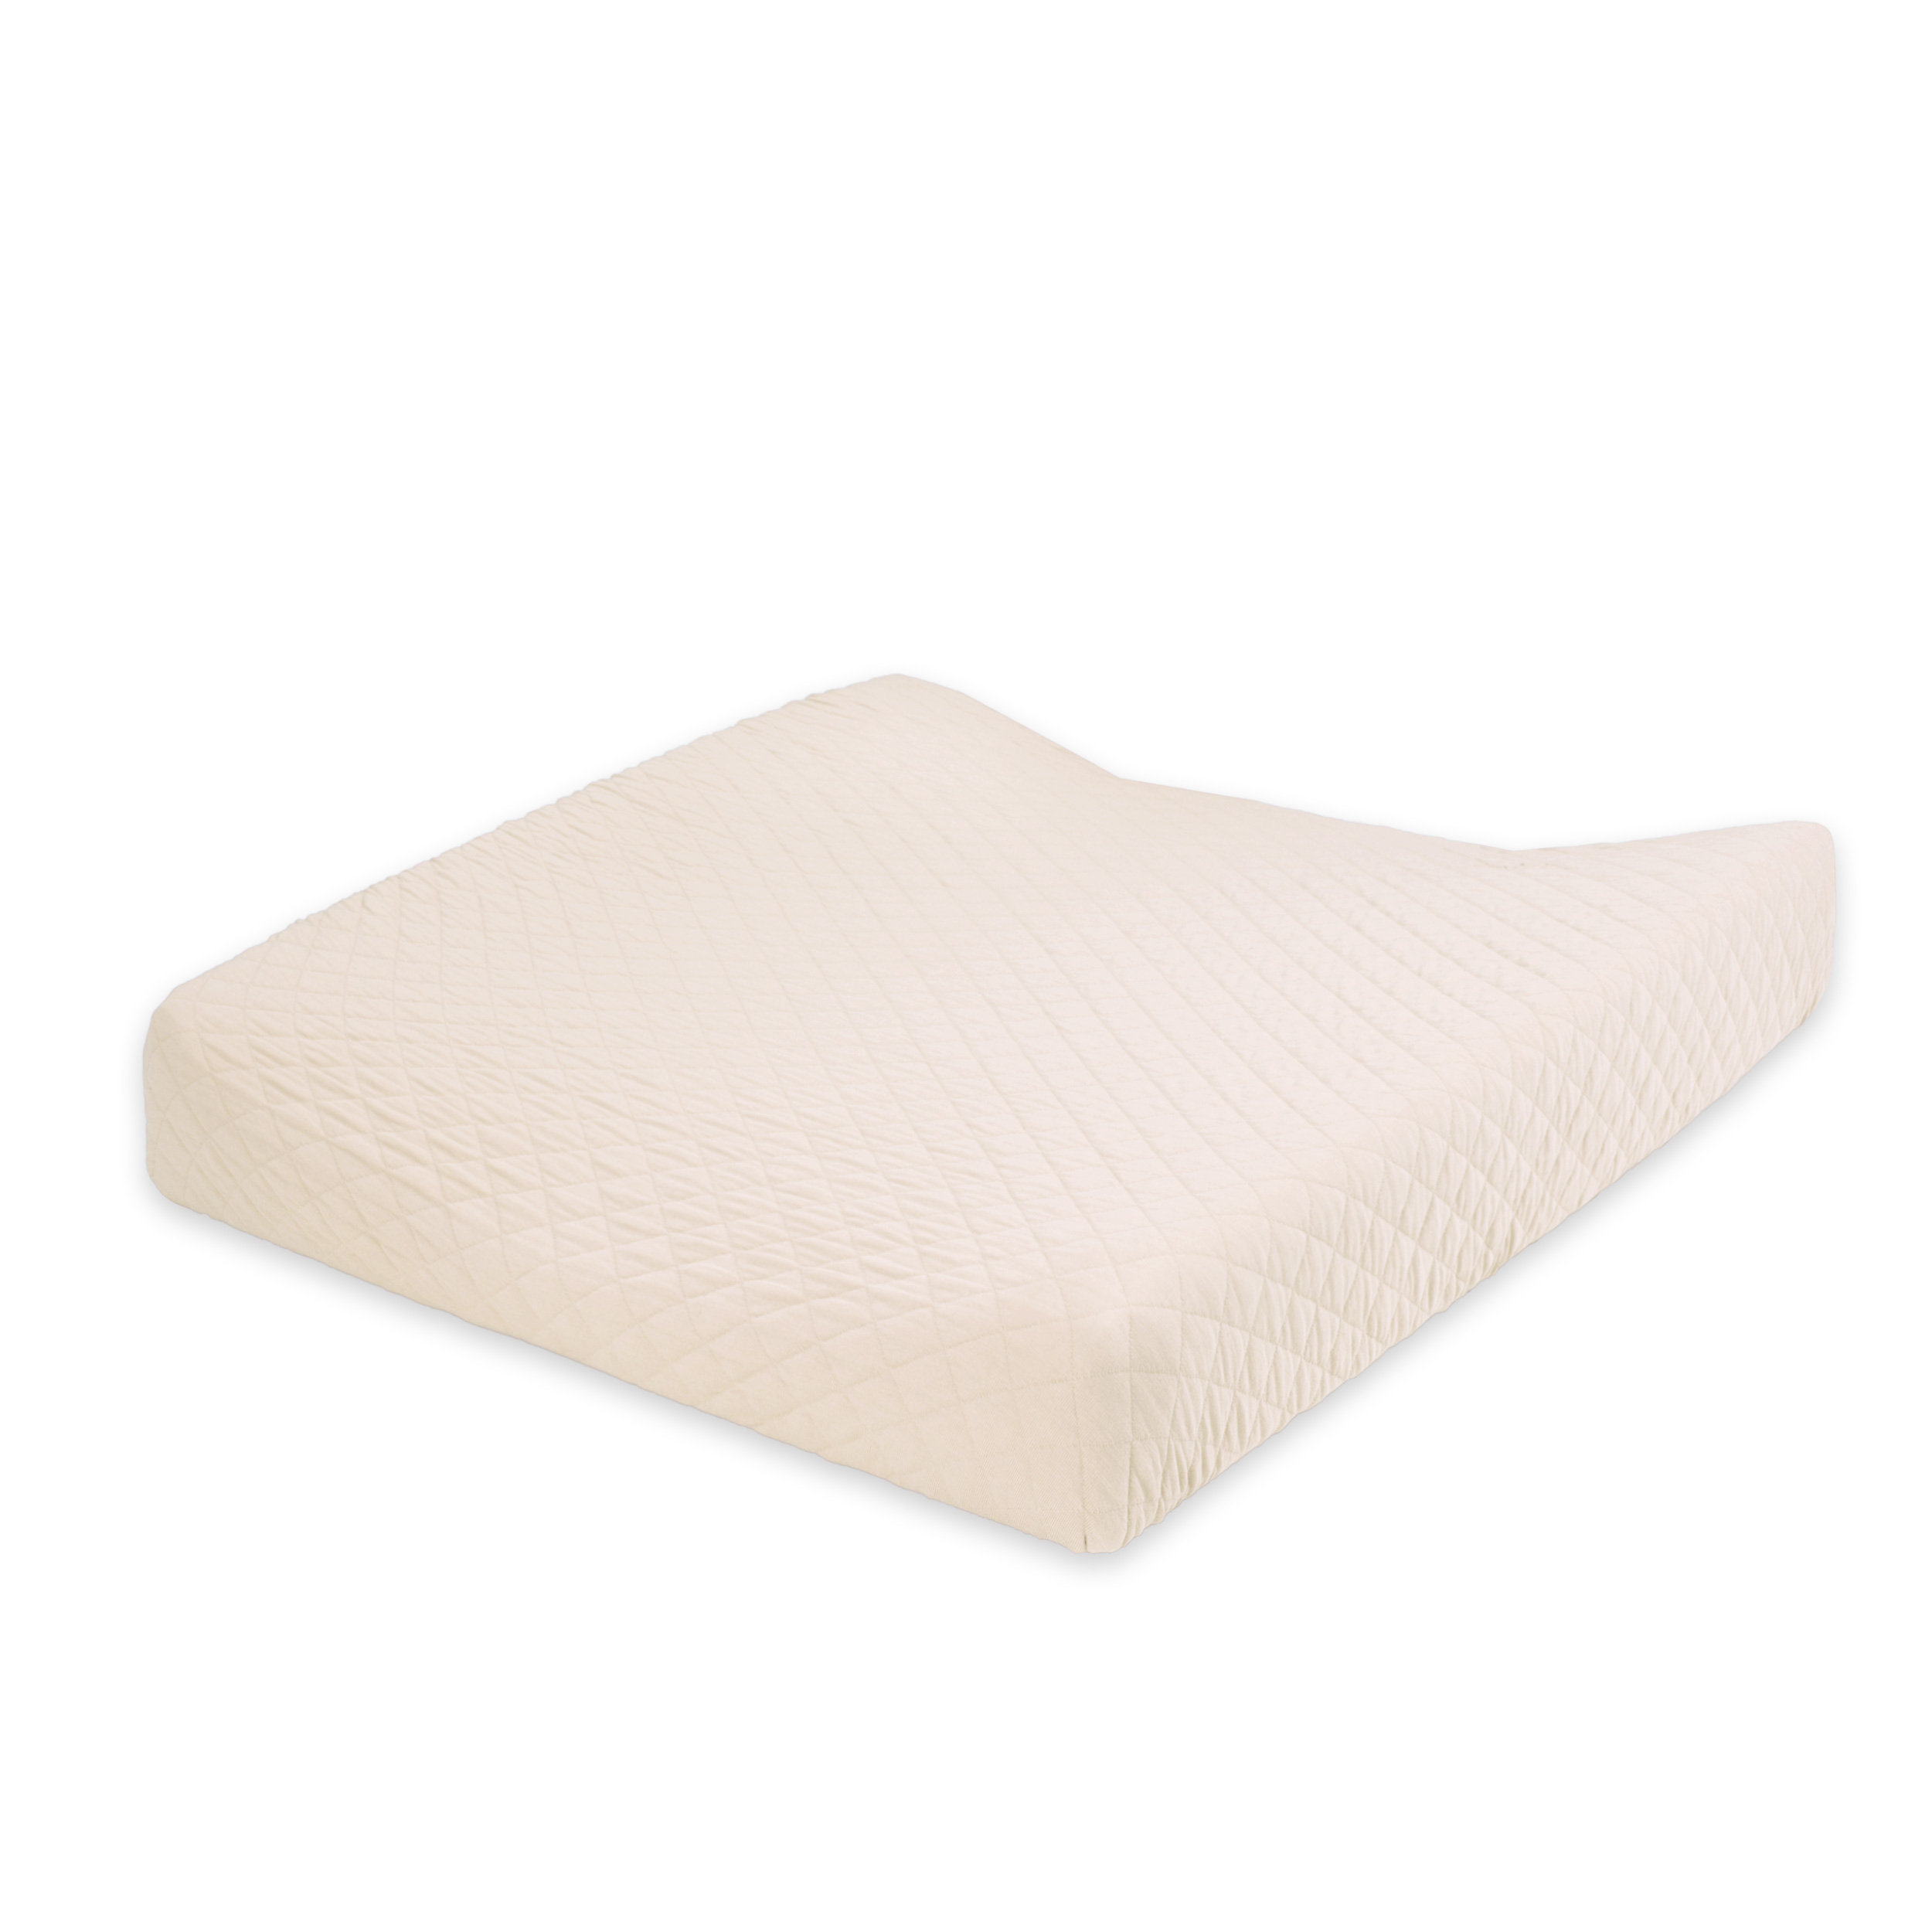 Waskussenhoes Pady quilted jersey 50x75cm QUILT Cream